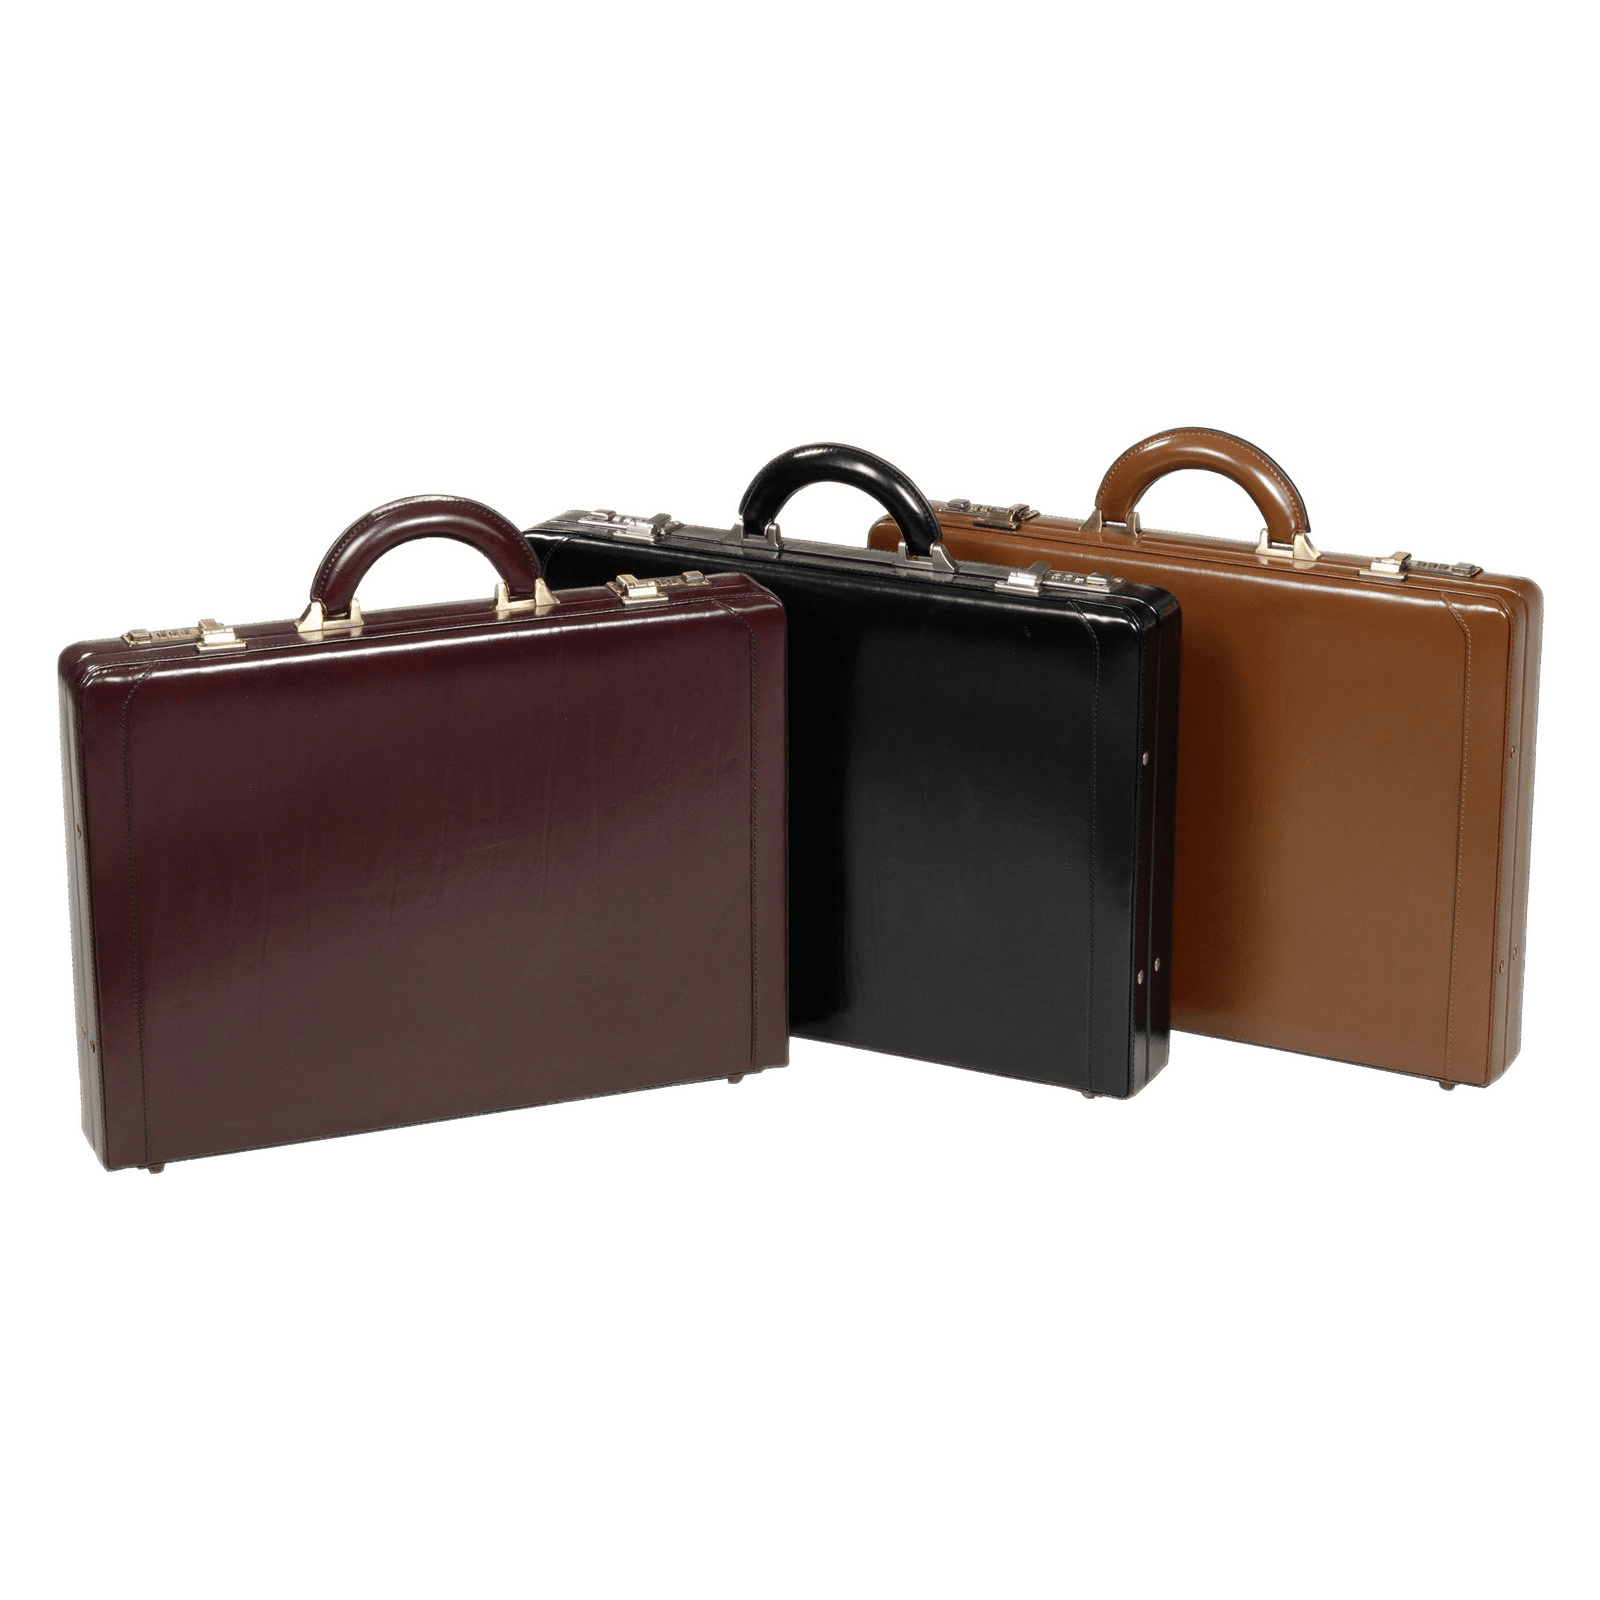 Briefcases Background PNG Image